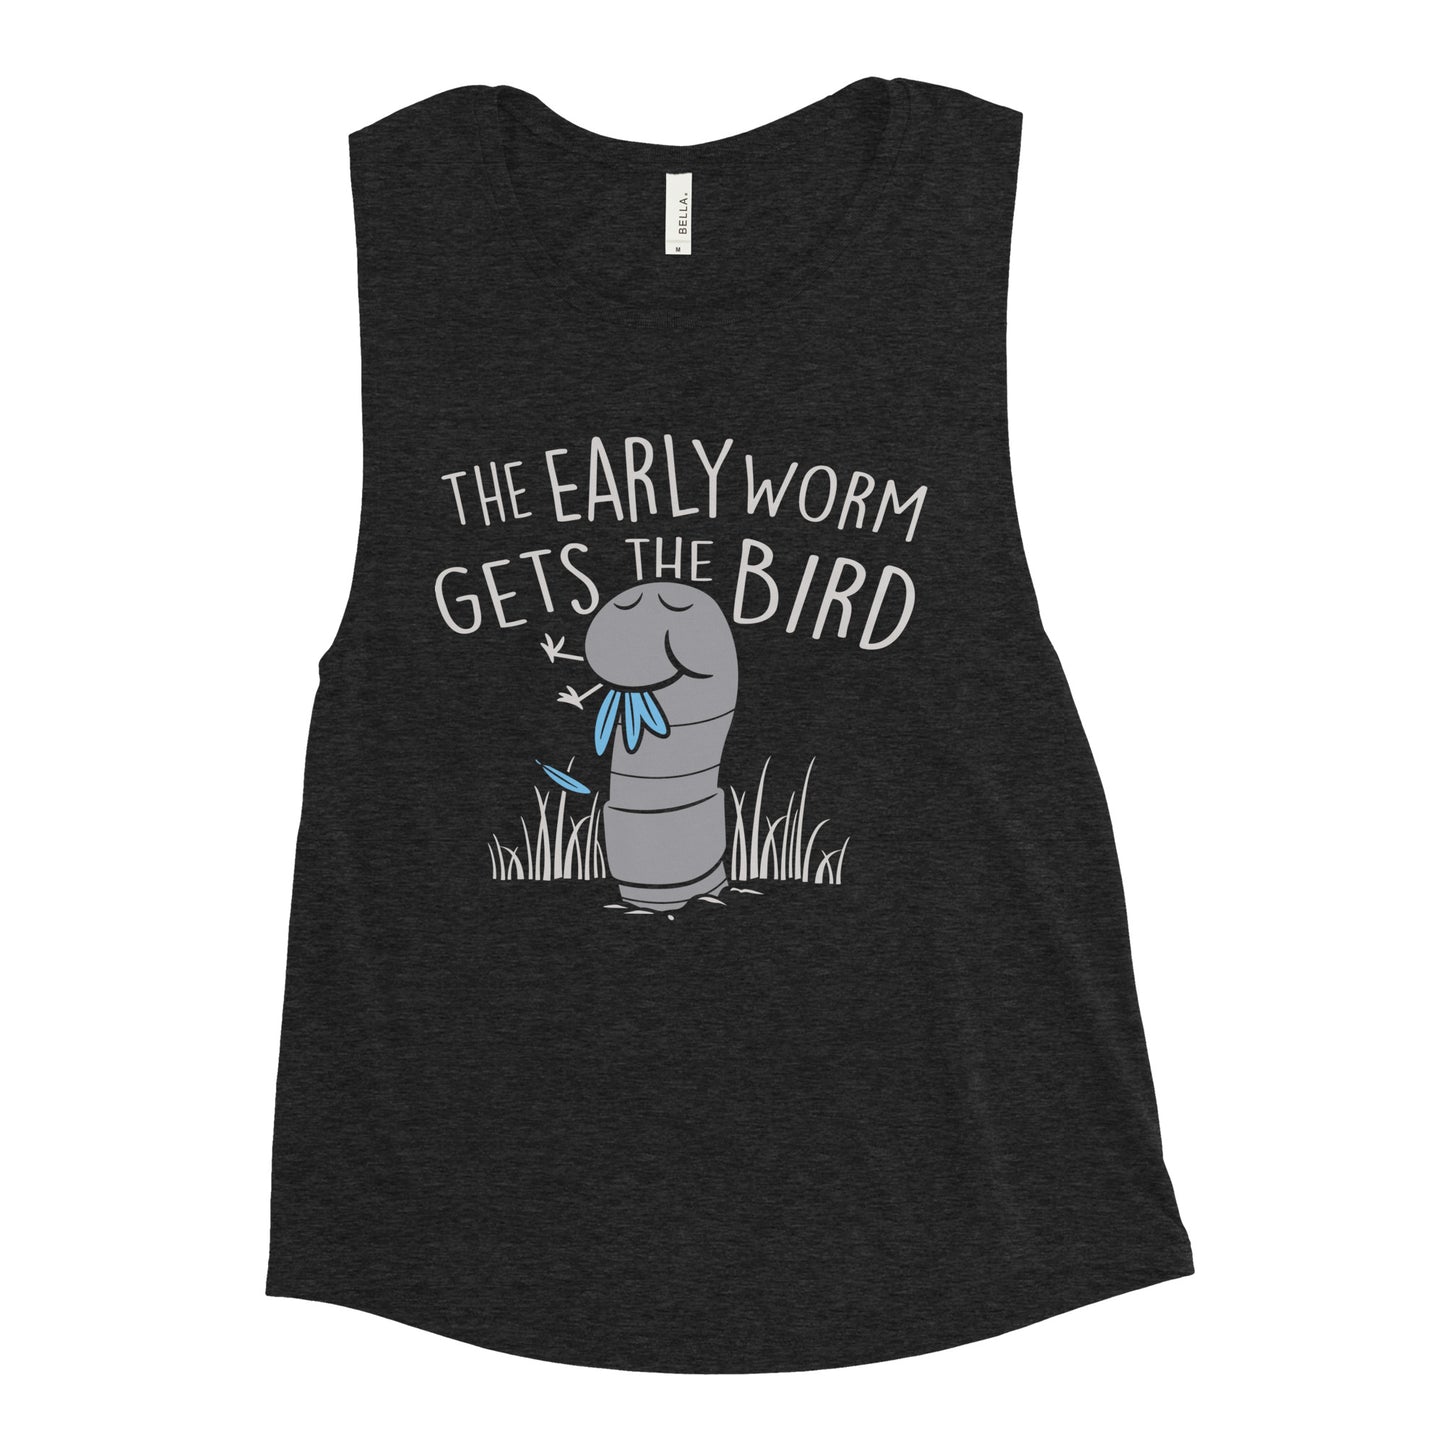 The Early Worm Gets The Bird Women's Muscle Tank